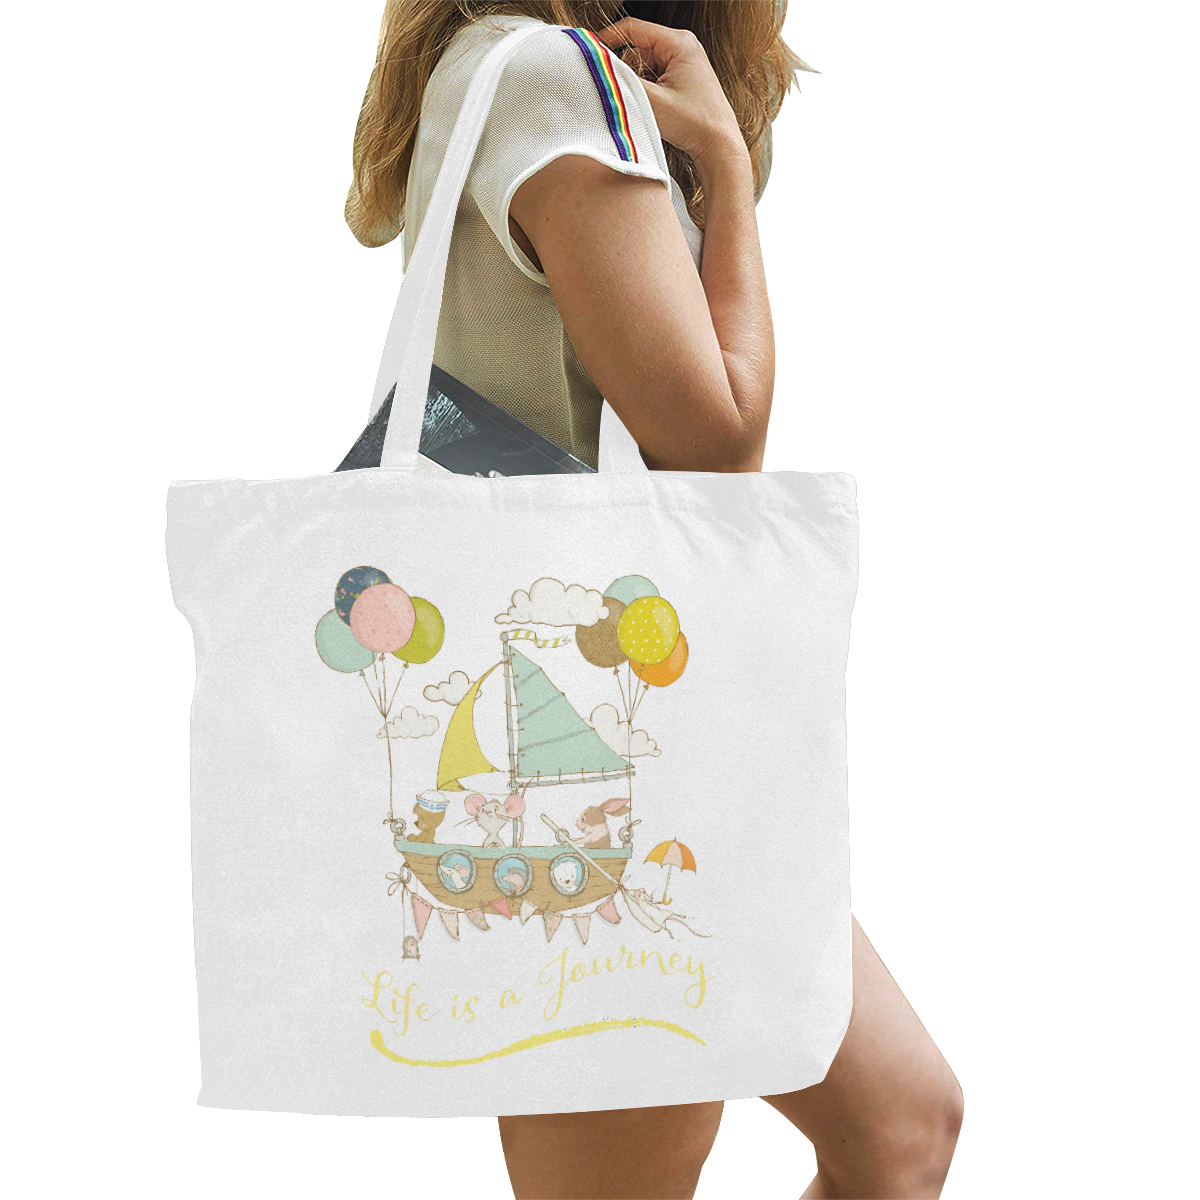 Life is a journey Canvas Tote Bag/Large (Model 1702)